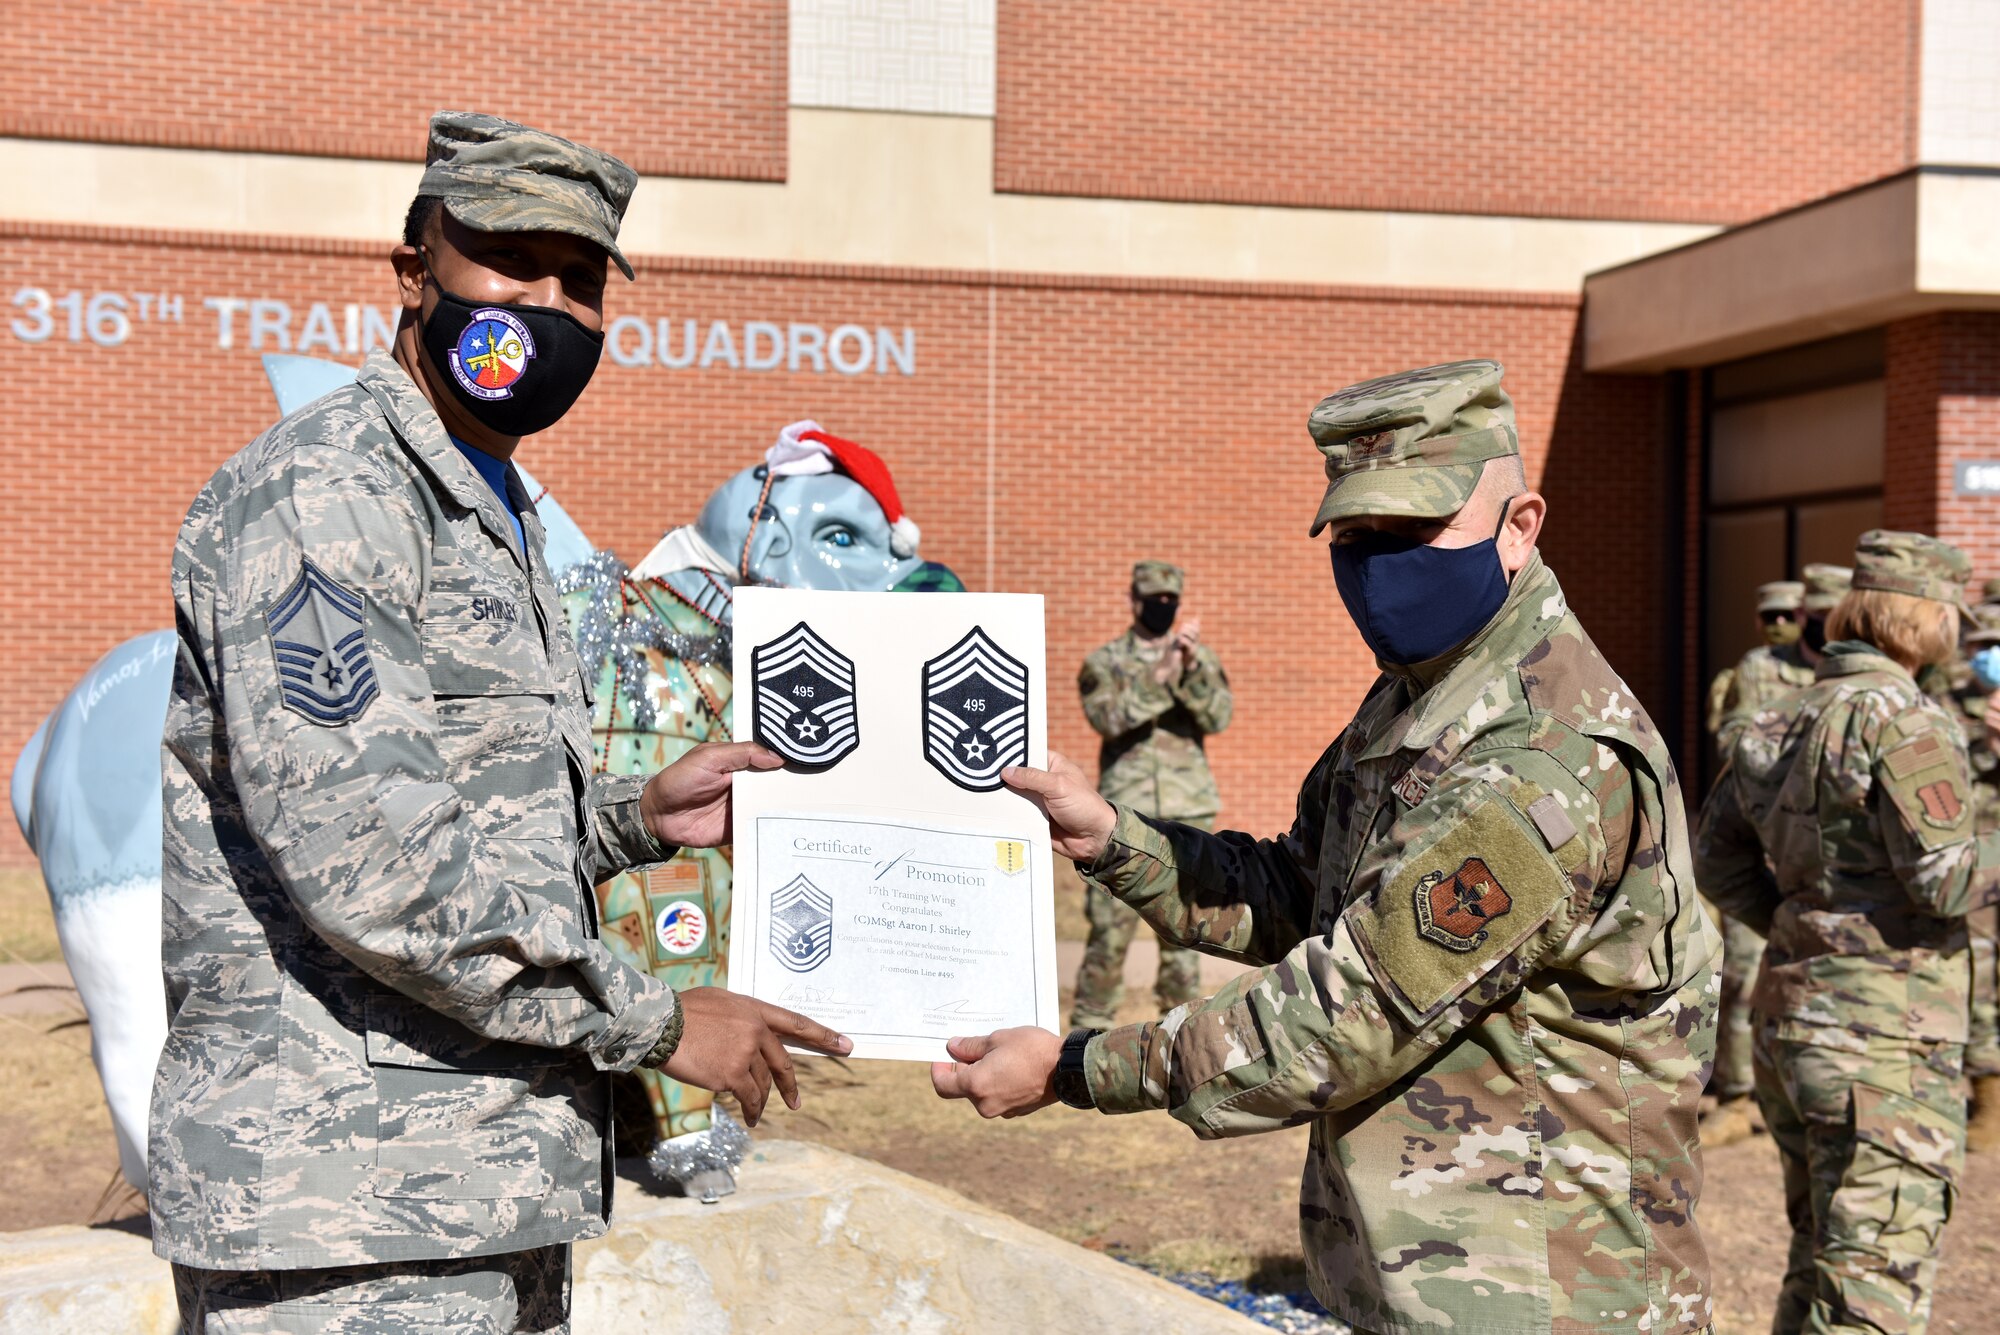 U.S. Air Force Col. Andres Nazario, 17th Training Wing commander, presents Chief Master Sgt. select Aaron Shirley, 316th Training Squadron superintendent, with stripes and a certificate with his line number at the 316th TRS on Goodfellow Air Force Base, Texas, Dec. 4, 2020. Chief master sergeants serve as key leaders at all levels in the Air Force. (U.S. Air Force photo by Staff Sgt. Seraiah Wolf)